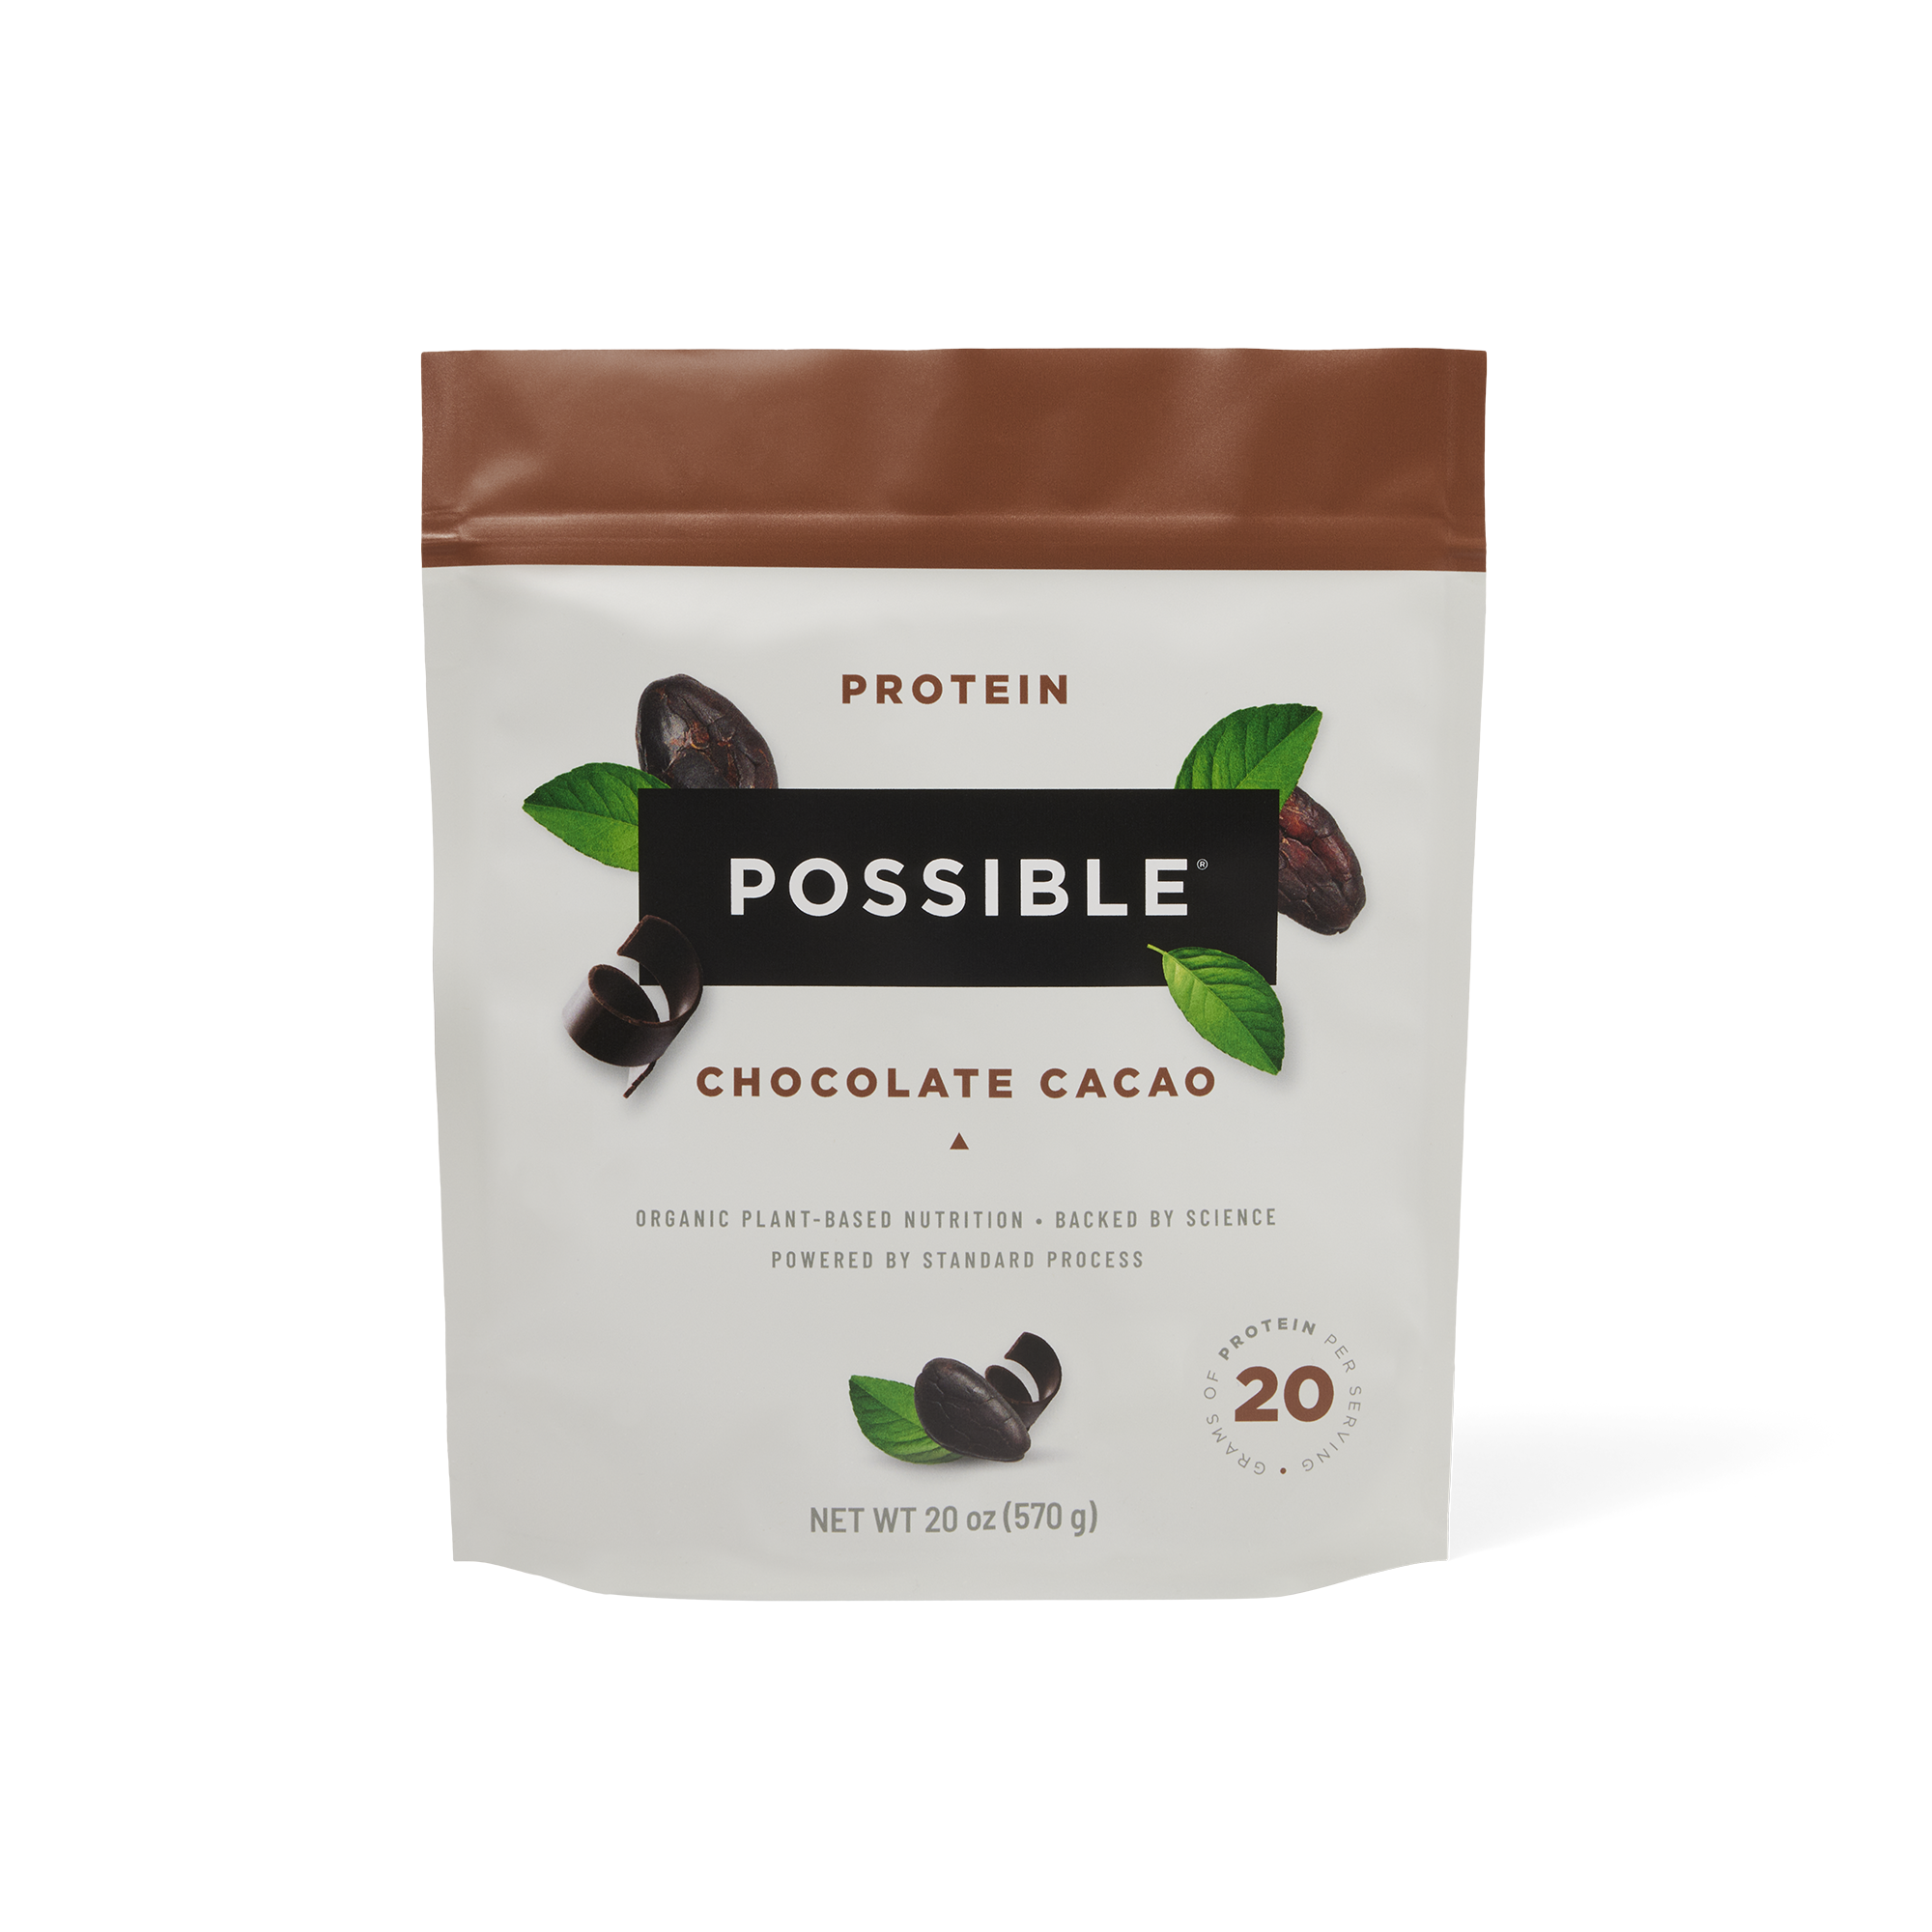 POSSIBLE® Protein Powder Subscription